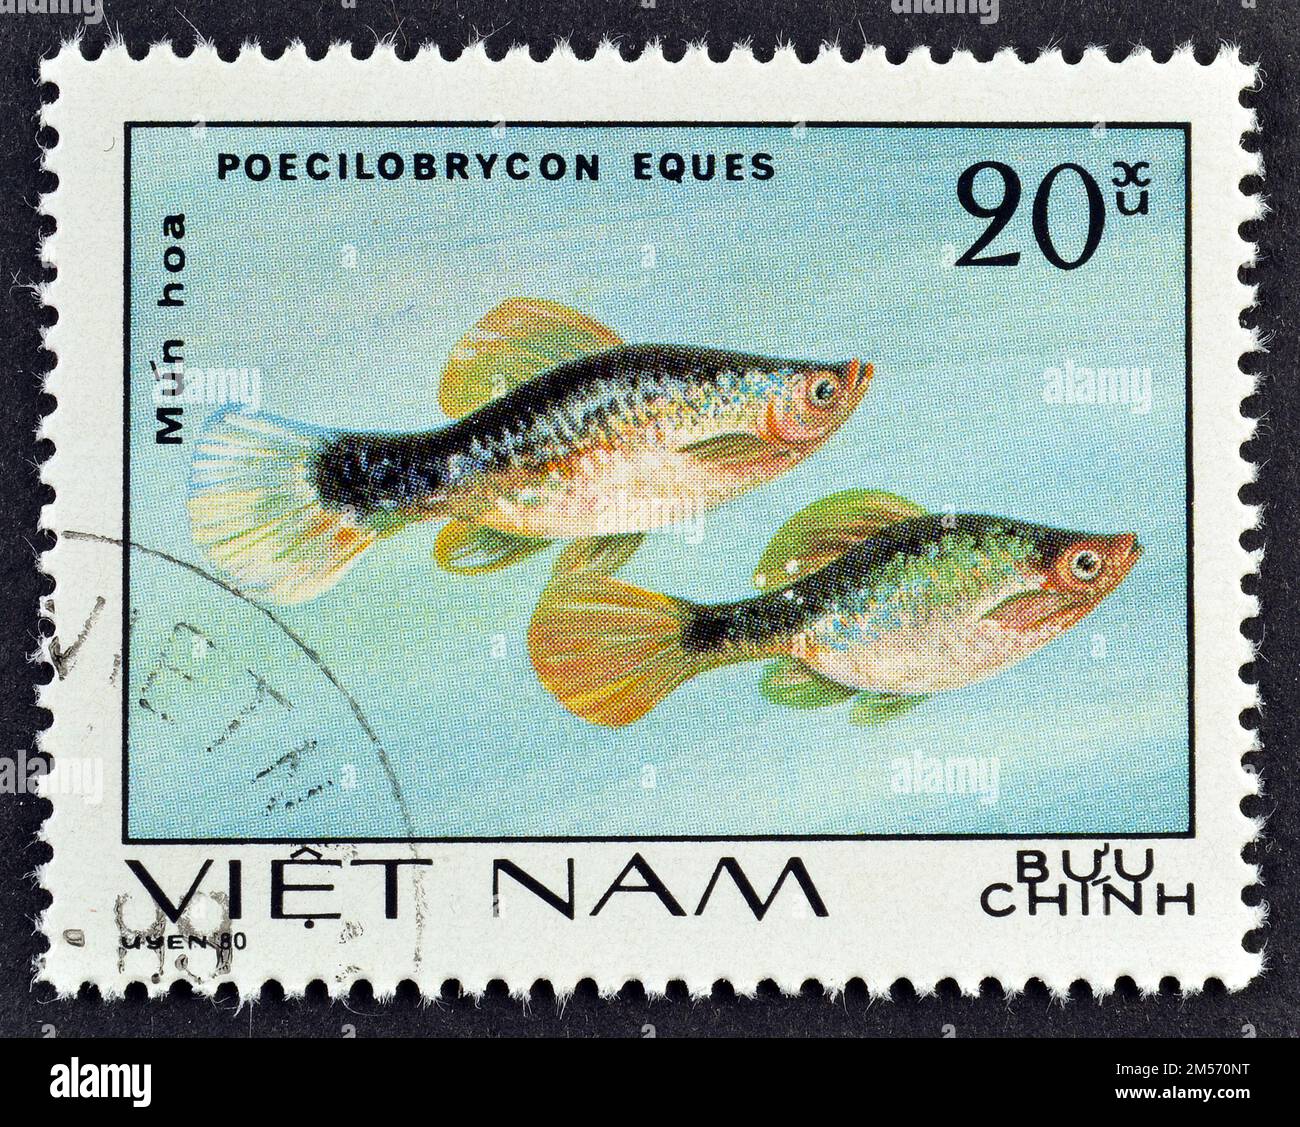 Cancelled postage stamp printed by Vietnam, that shows Mun hoa - Platy Pencilfish (Poecilobrycon eques), circa 1980. Stock Photo